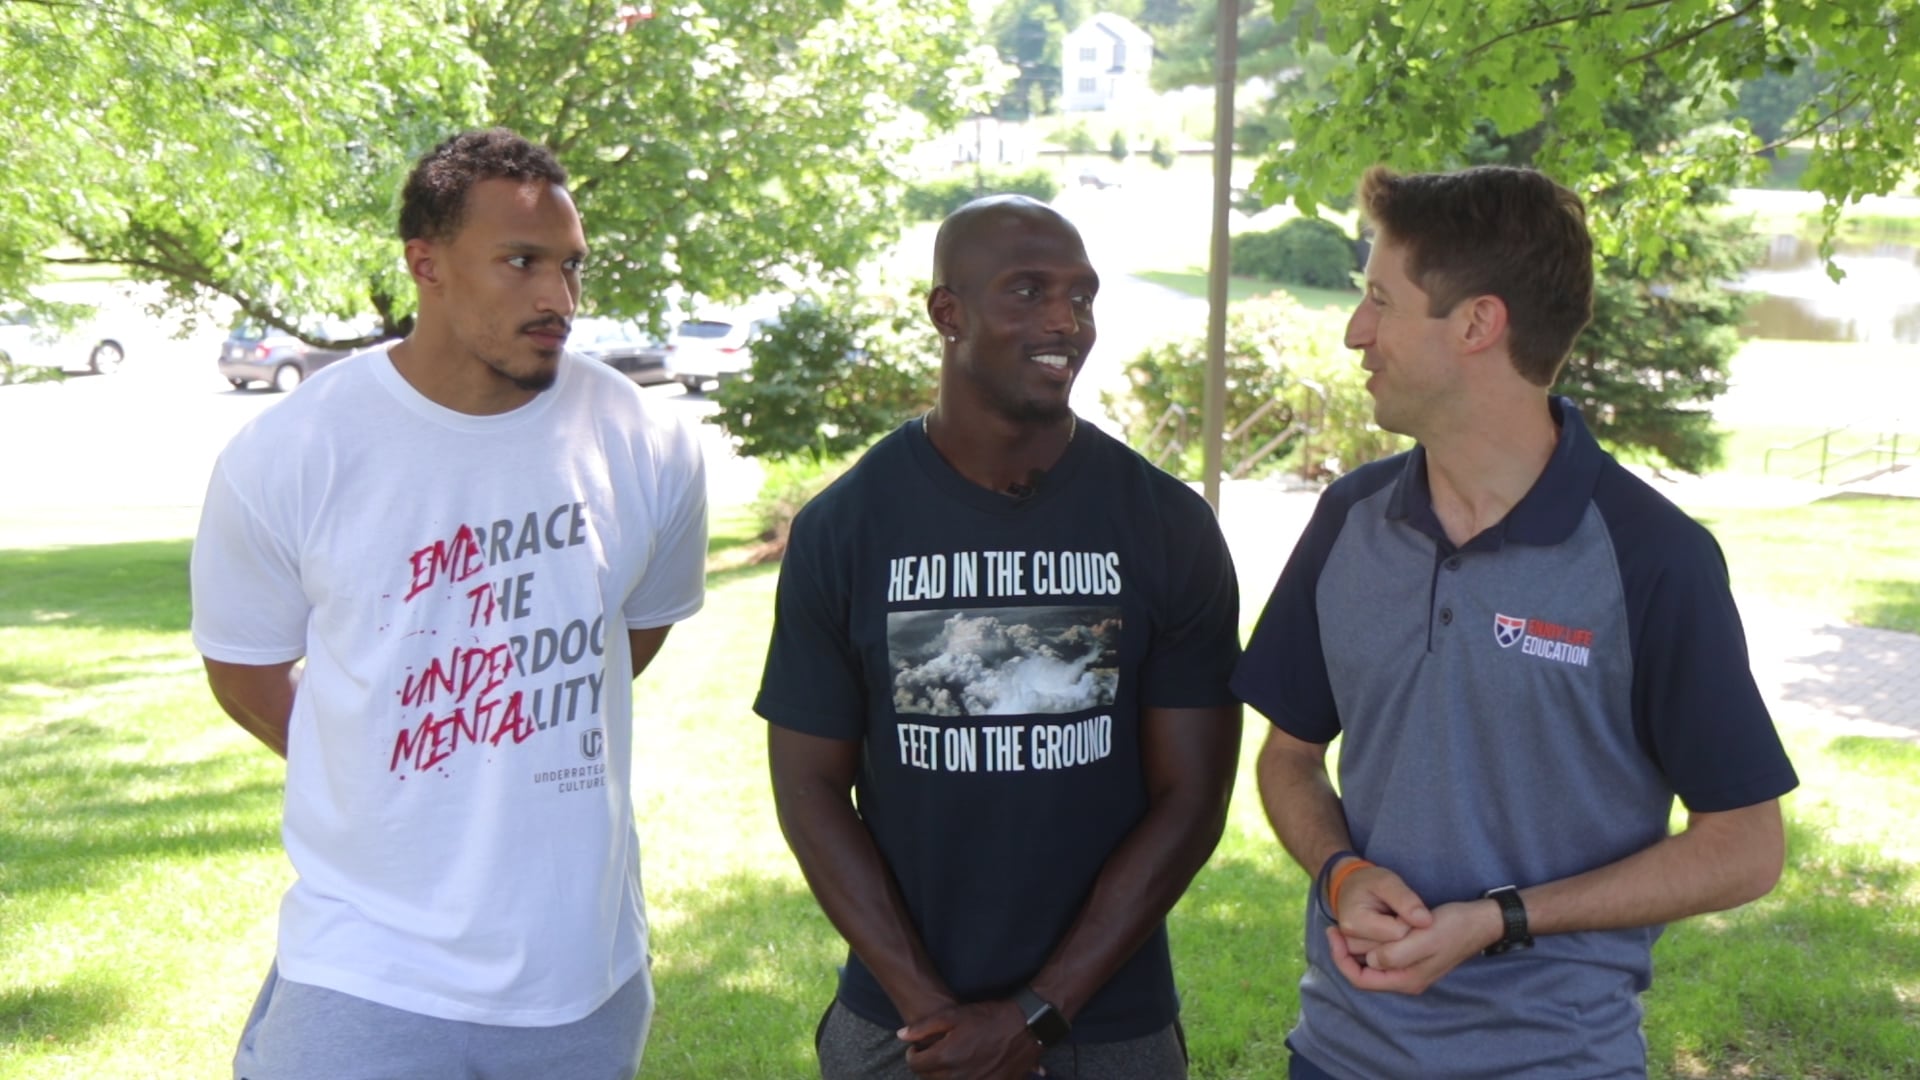 The New England Patriots Visit the Leadership Academy